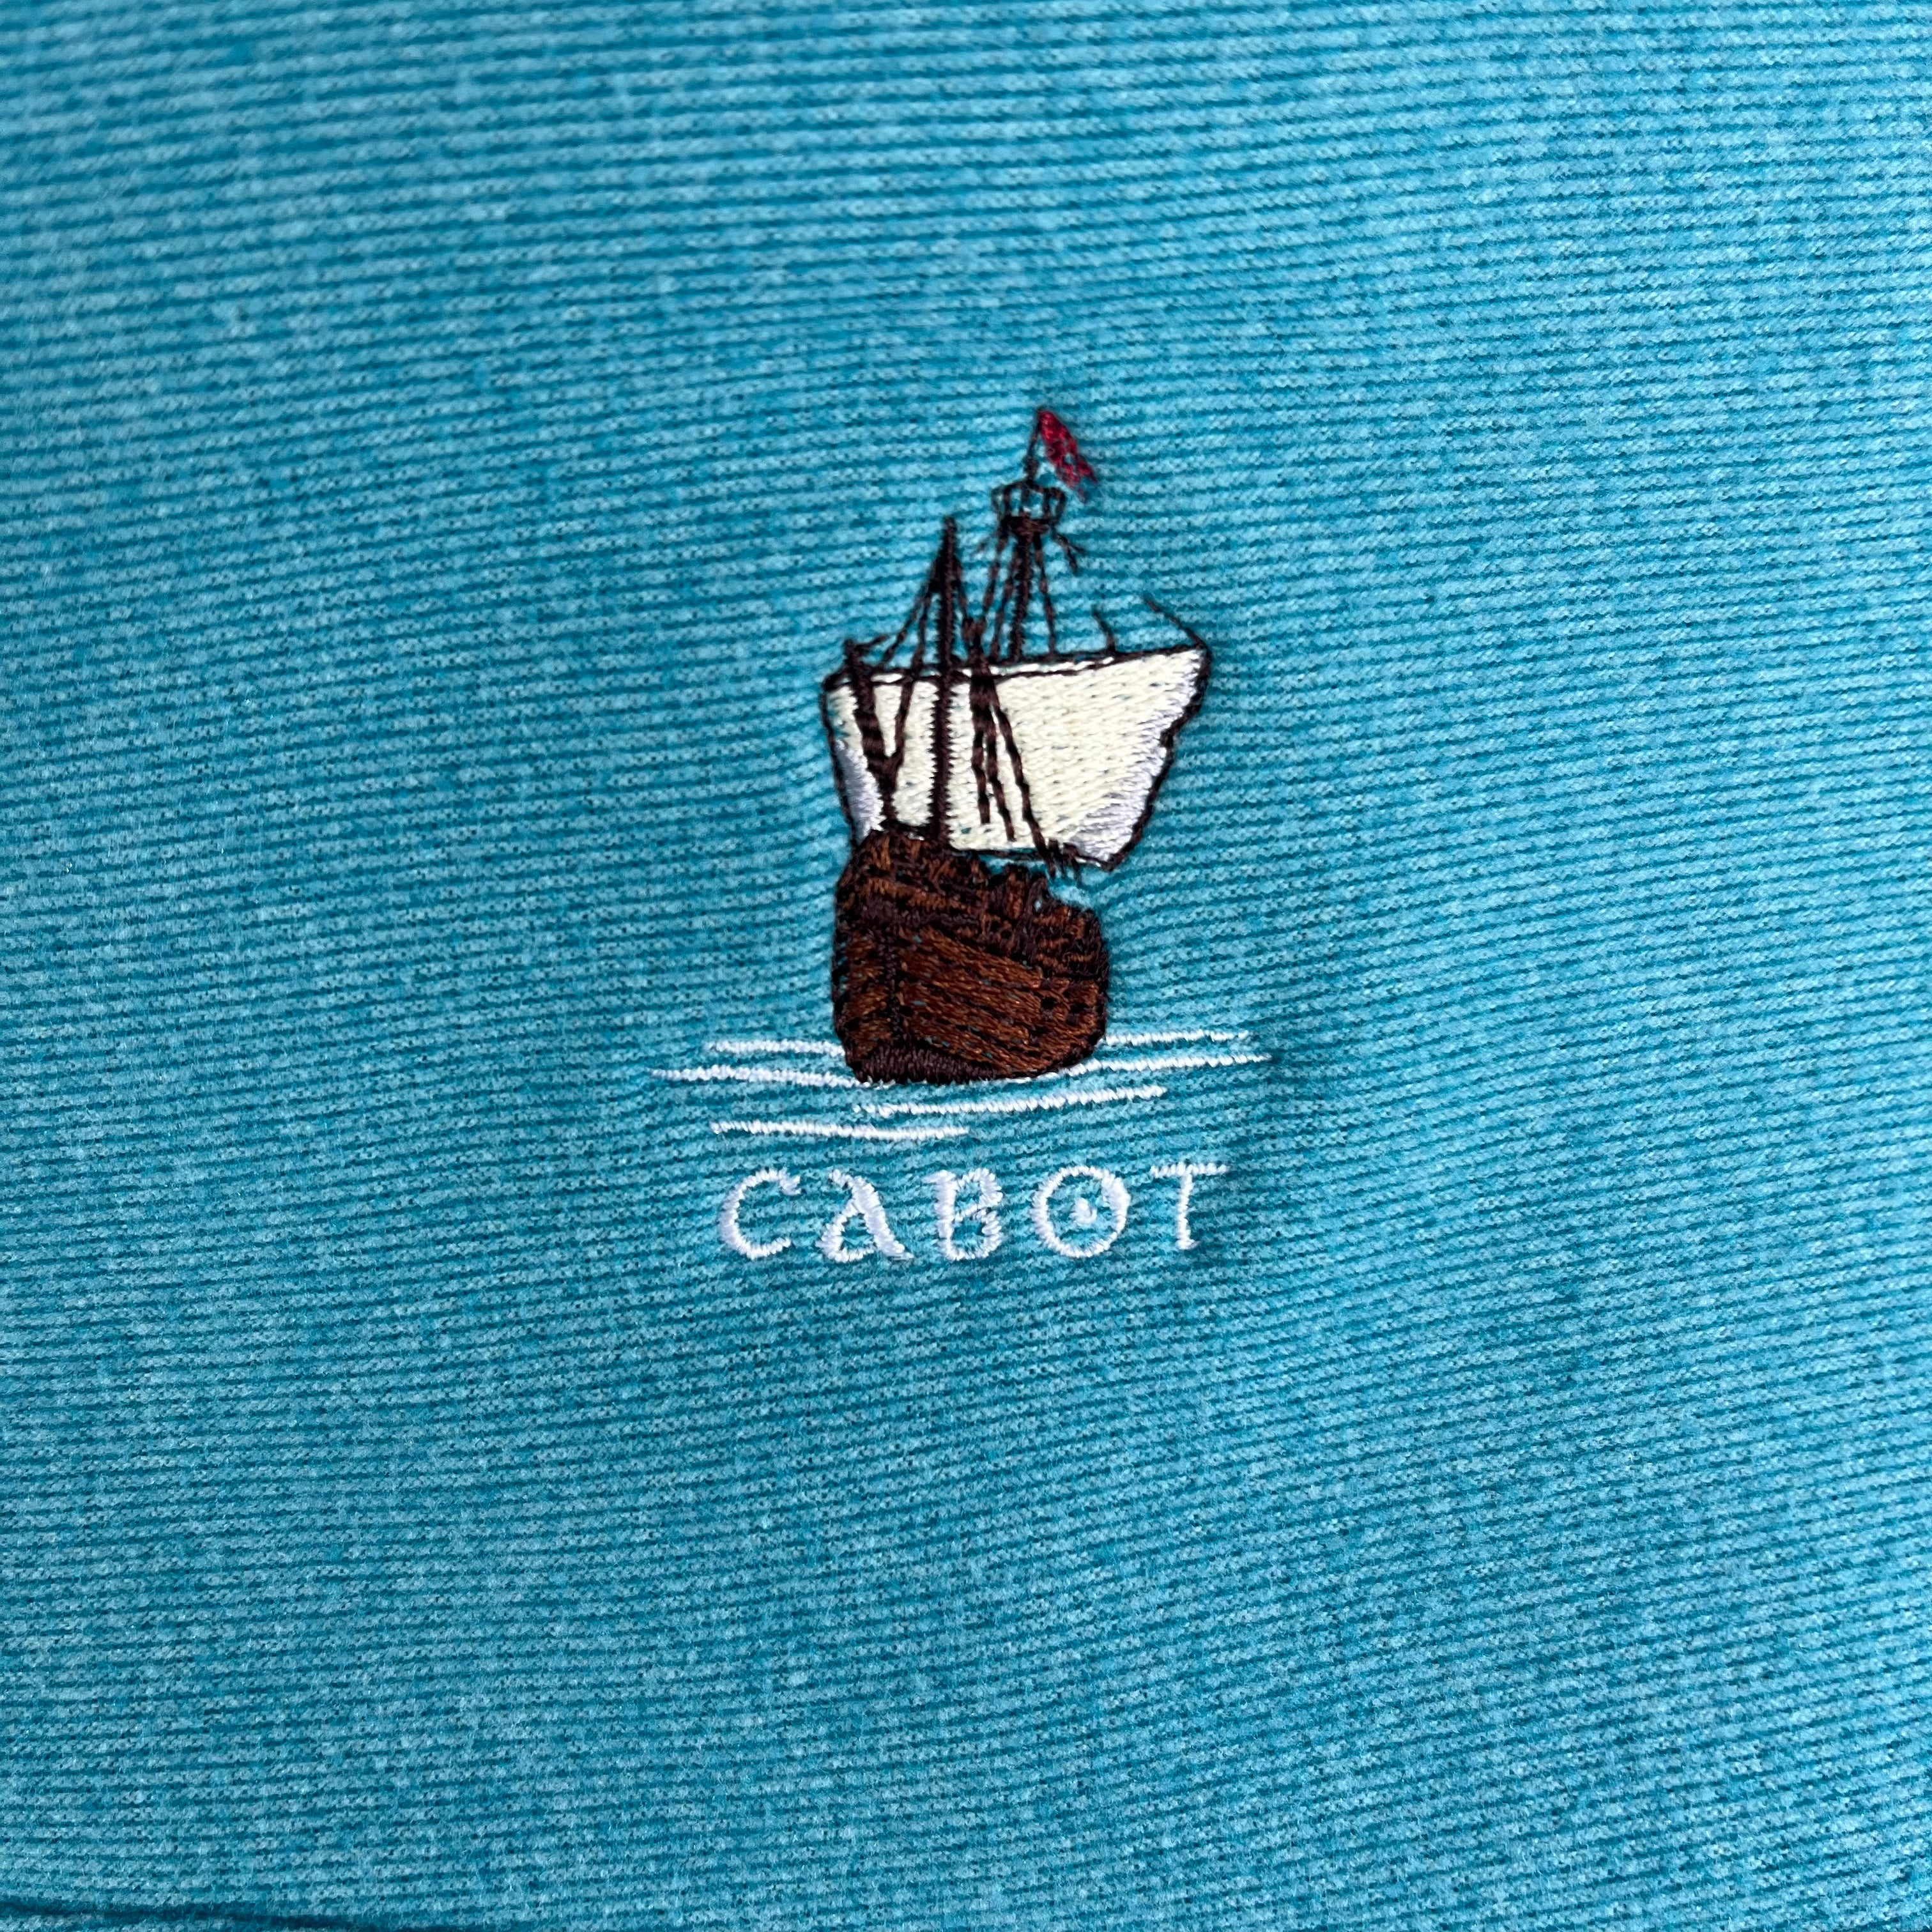 Adidas Cabot Links Go To 1/4 Zip Hoodie